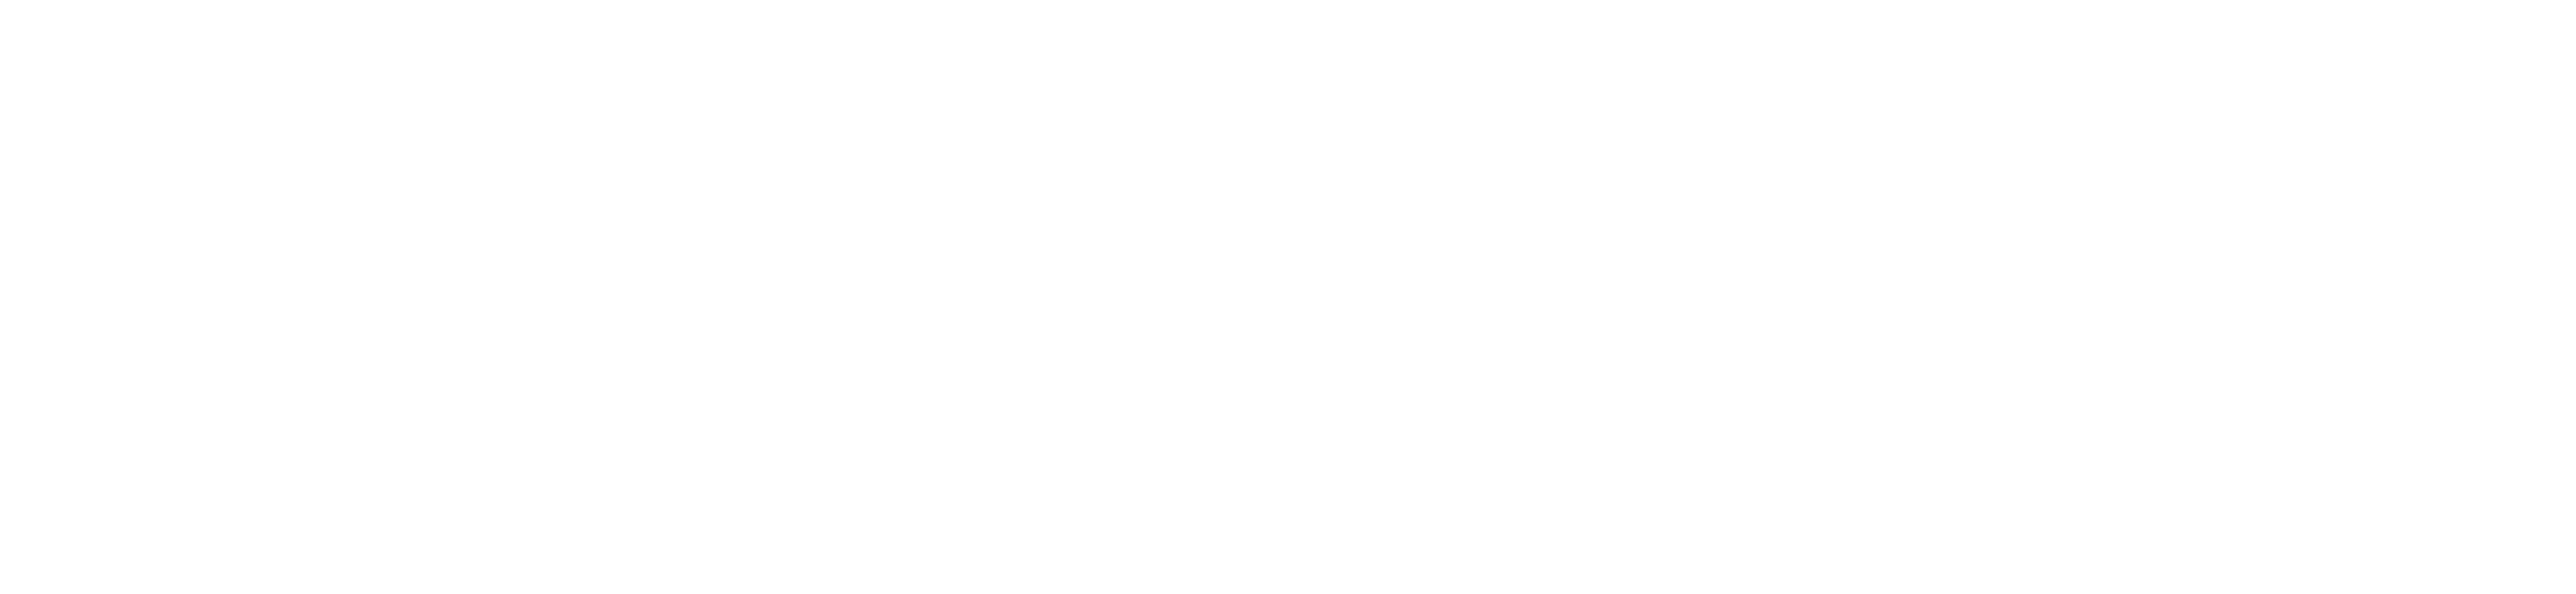 Belly of the Beast (2020)